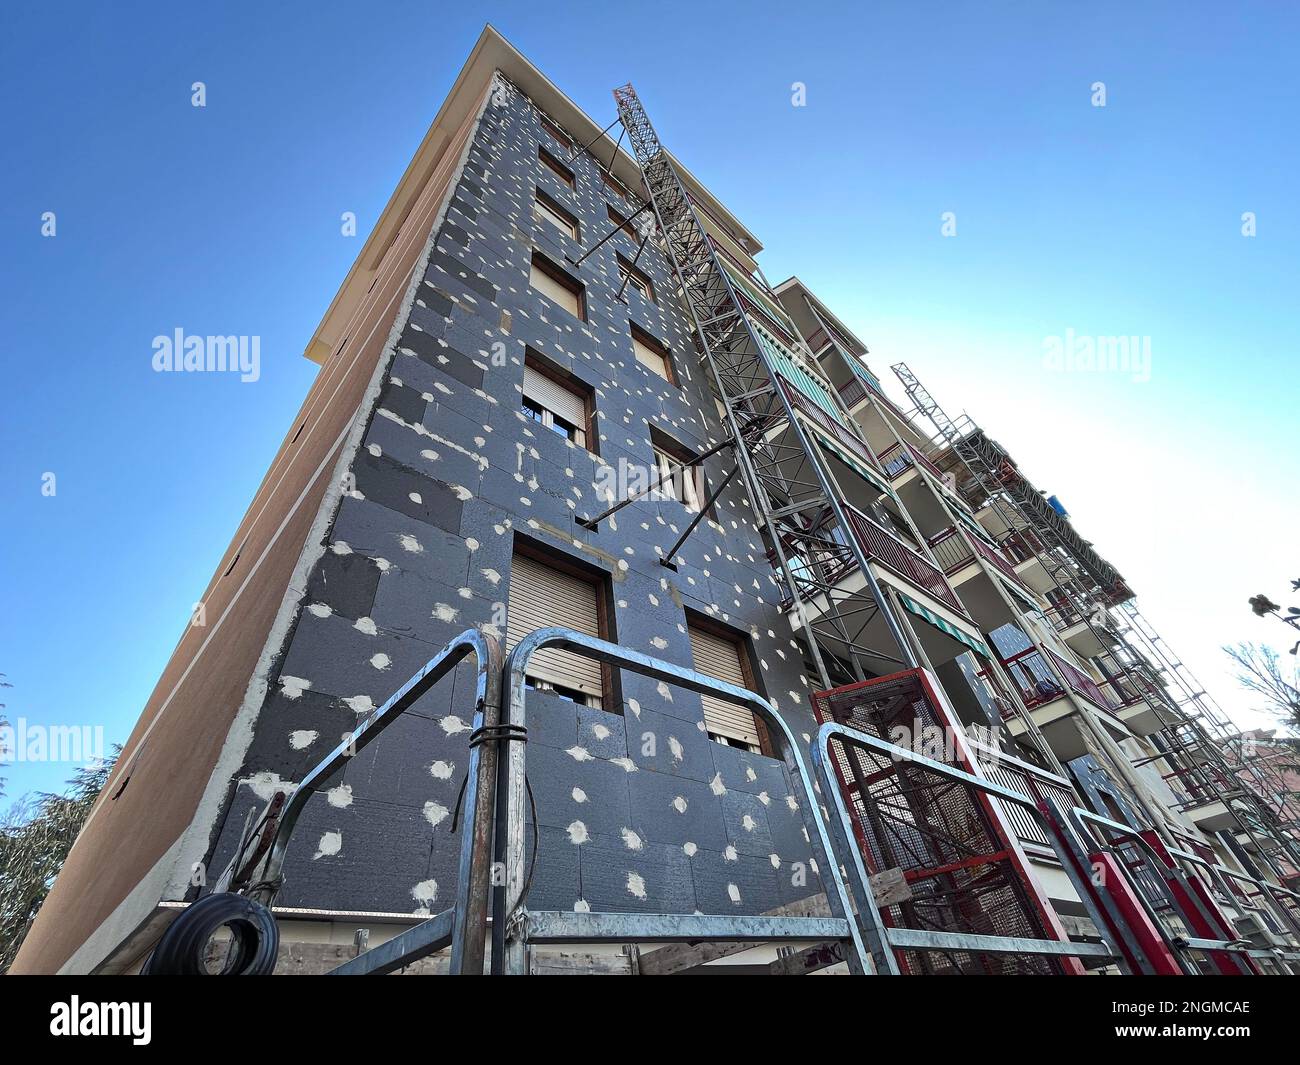 Renovation work on a building to improve thermal efficiency Stock Photo